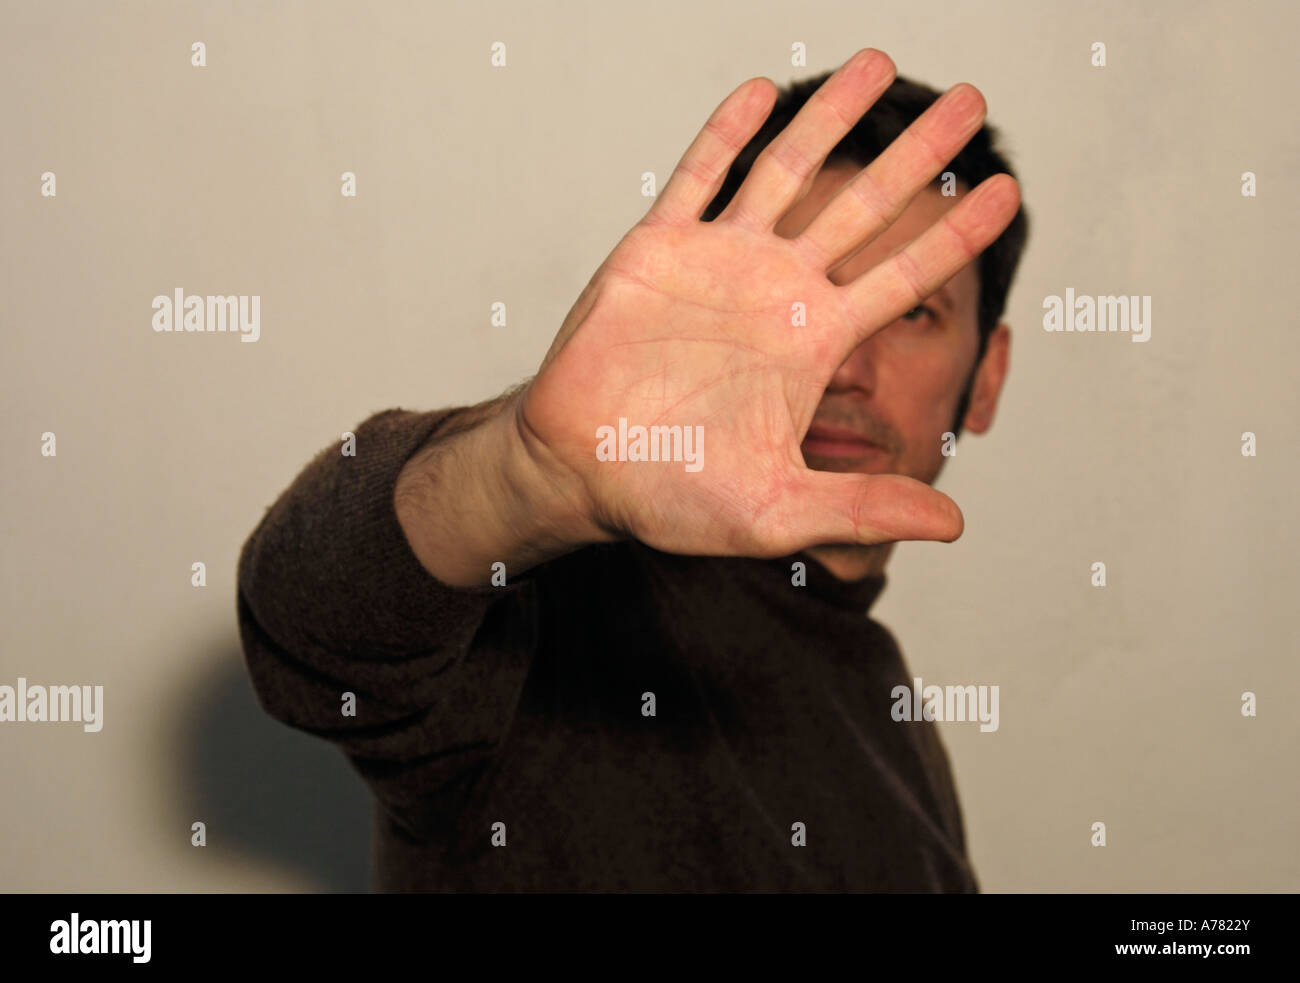 young man holding up his hand blocking photographer camera Stock Photo